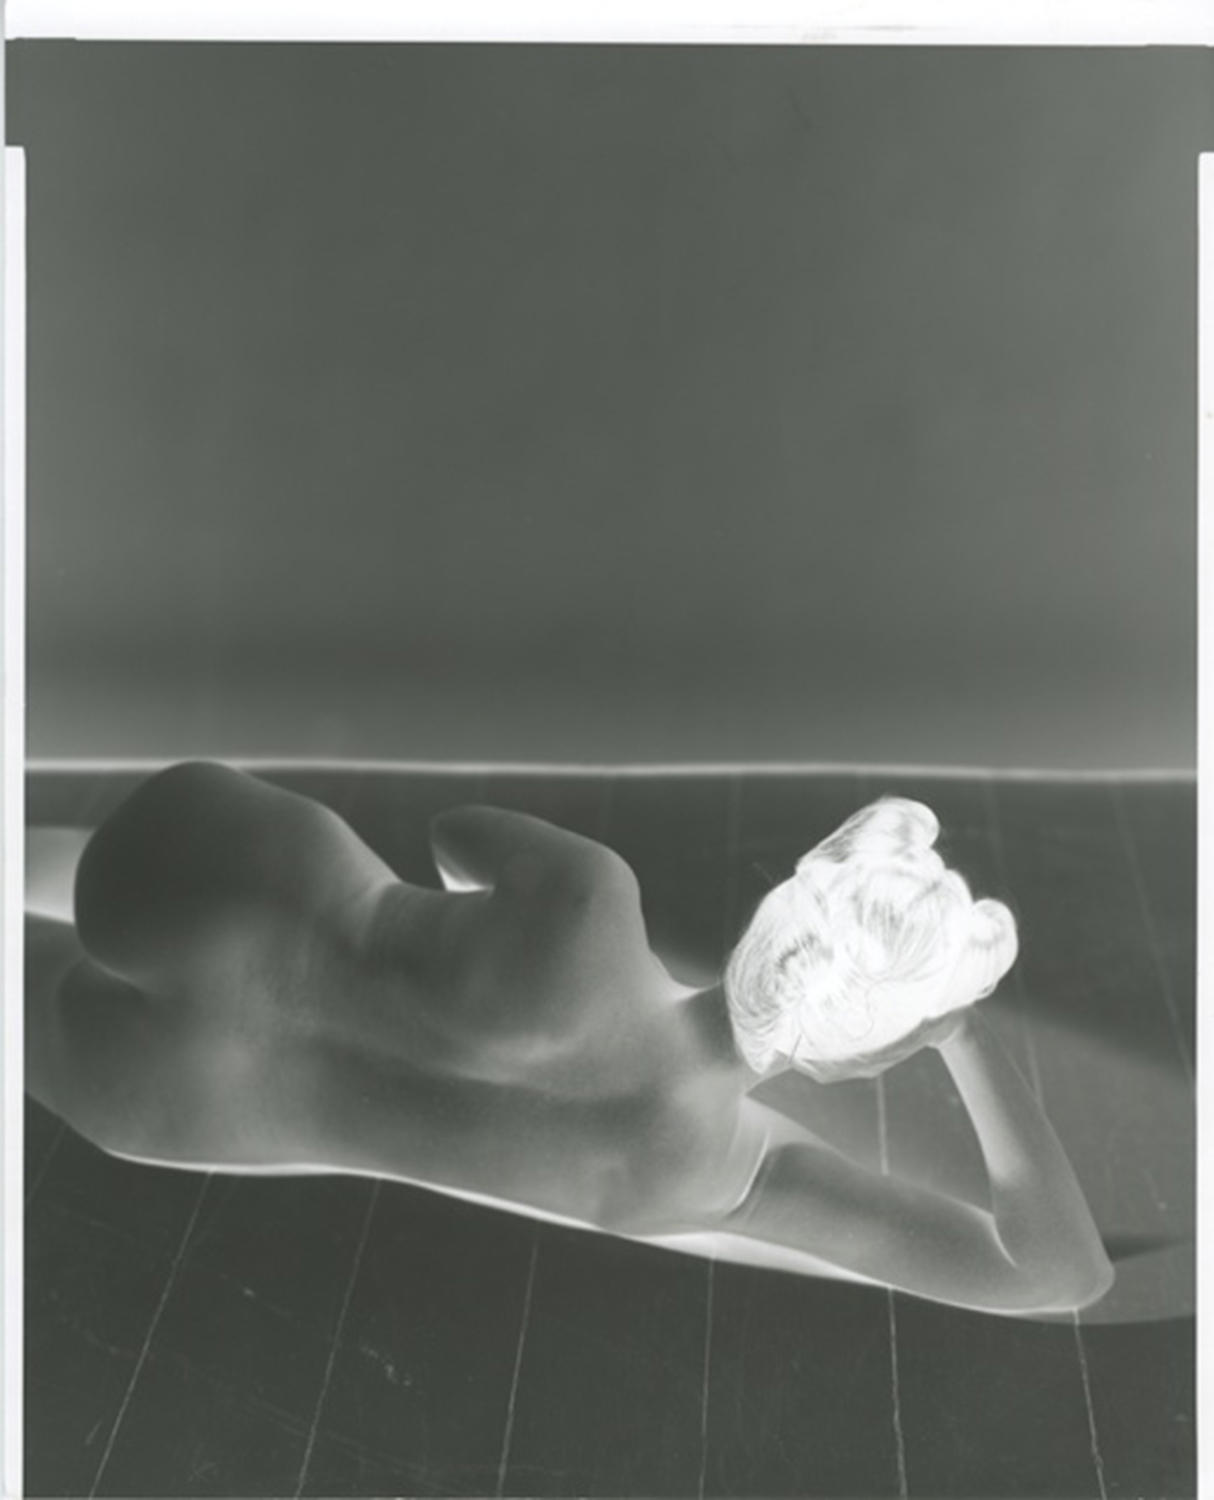  Dora Forbert, Untitled, ca 1942, From the Archive of Adela K., 8 x 10 inches, C-41 print, edition of 8, 2011 